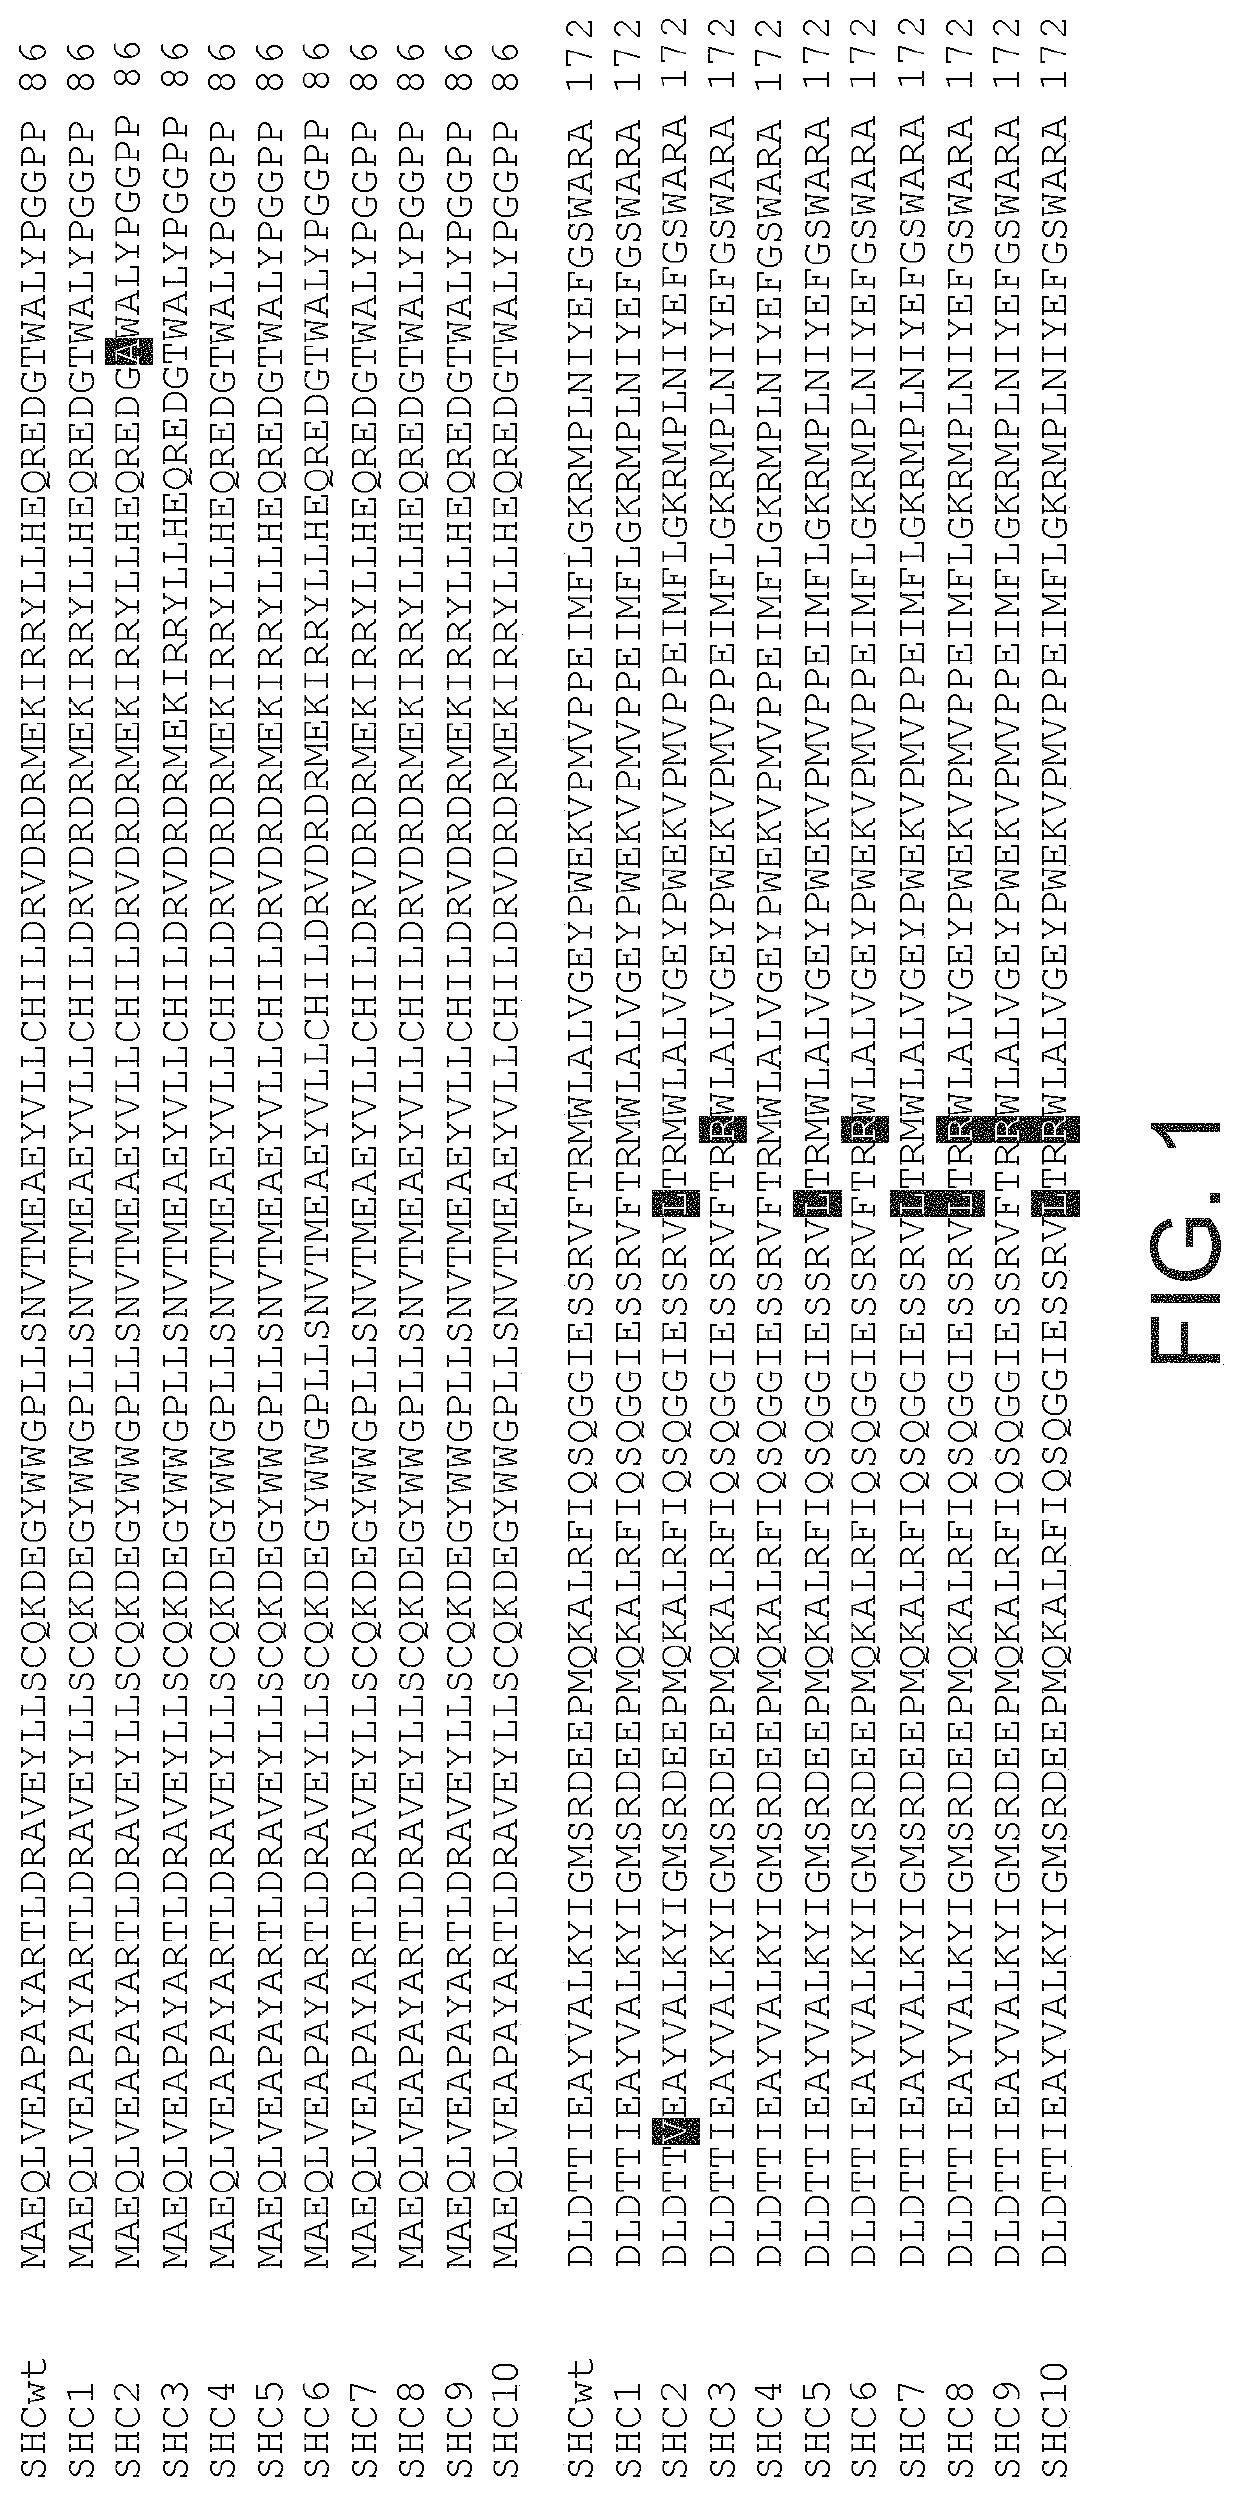 Enzymes and applications thereof